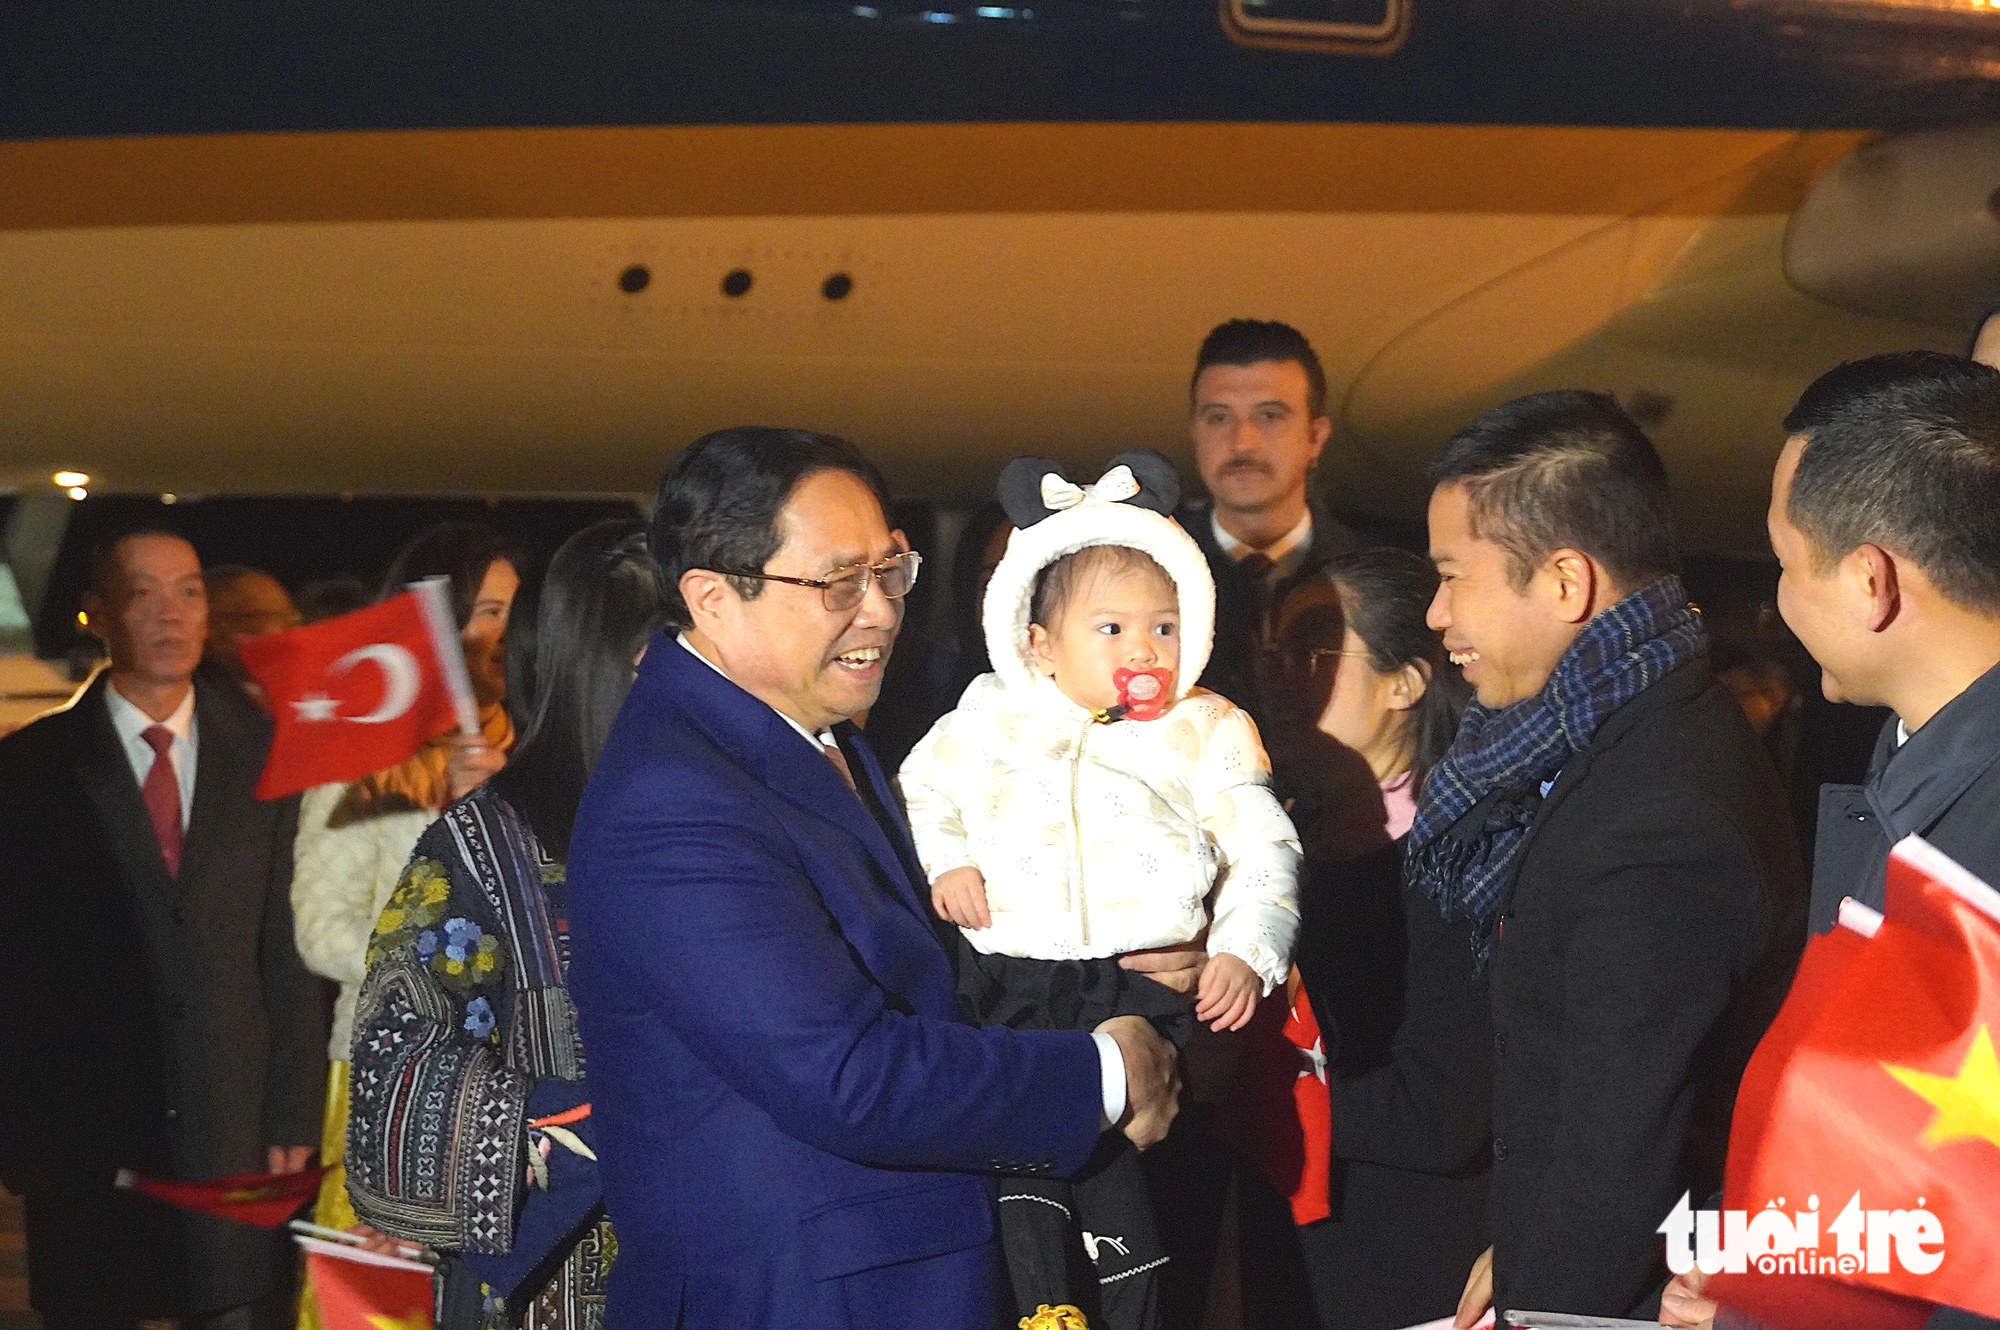 Prime Minister Pham Minh Chinh holds a baby on his arrival at Esenboga International Airport in Ankara, the capital city of Turkey. Photo: Ngoc An / Tuoi Tre